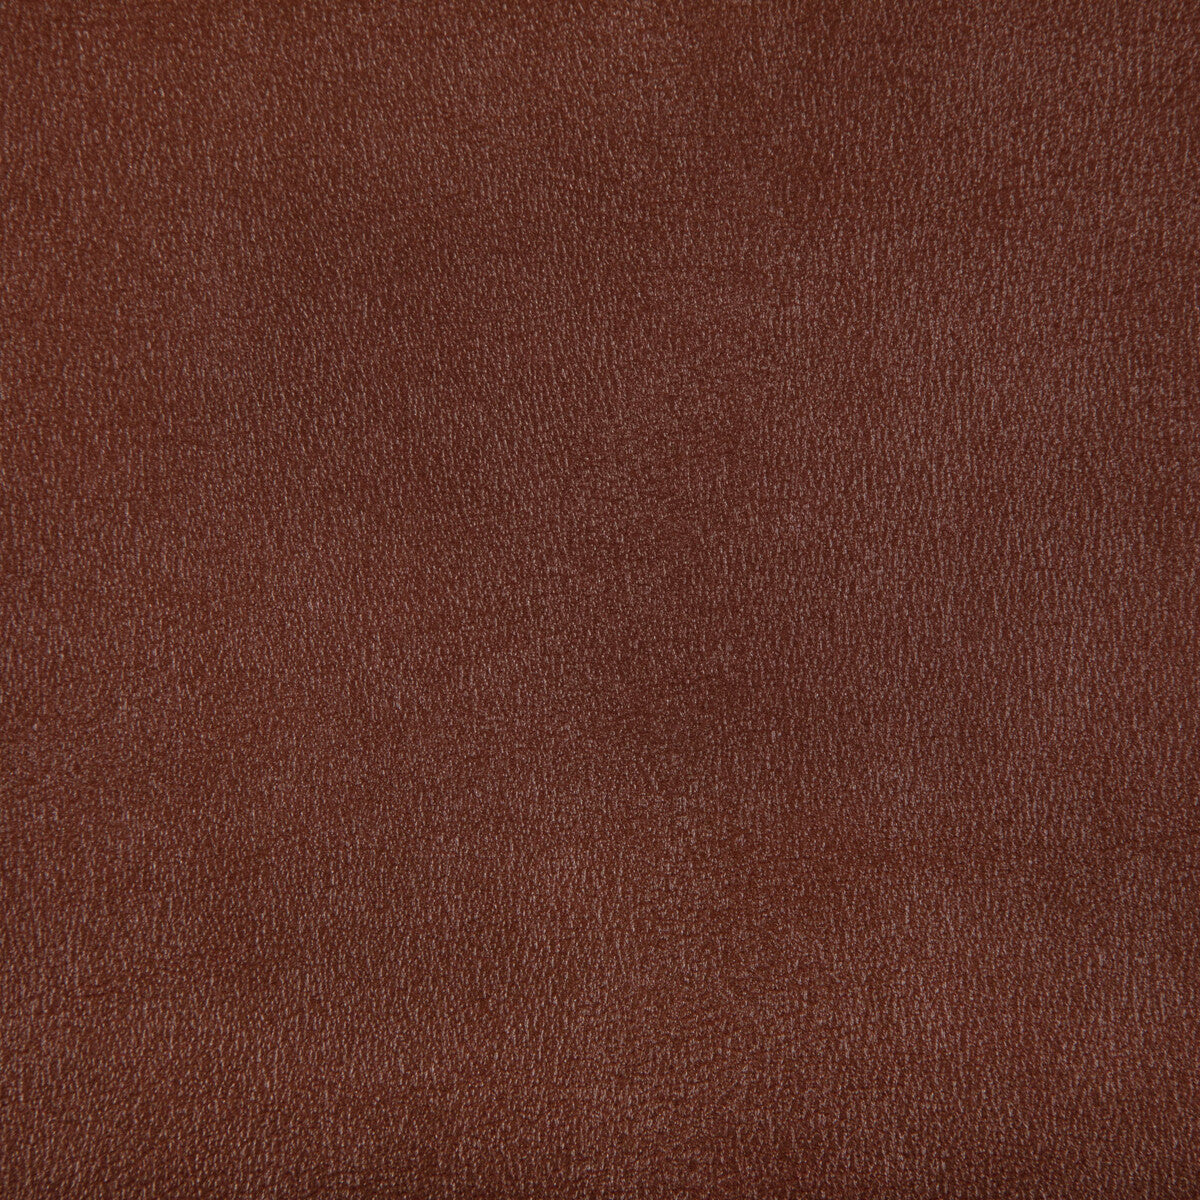 Agatha fabric in copper color - pattern AGATHA.6.0 - by Kravet Contract